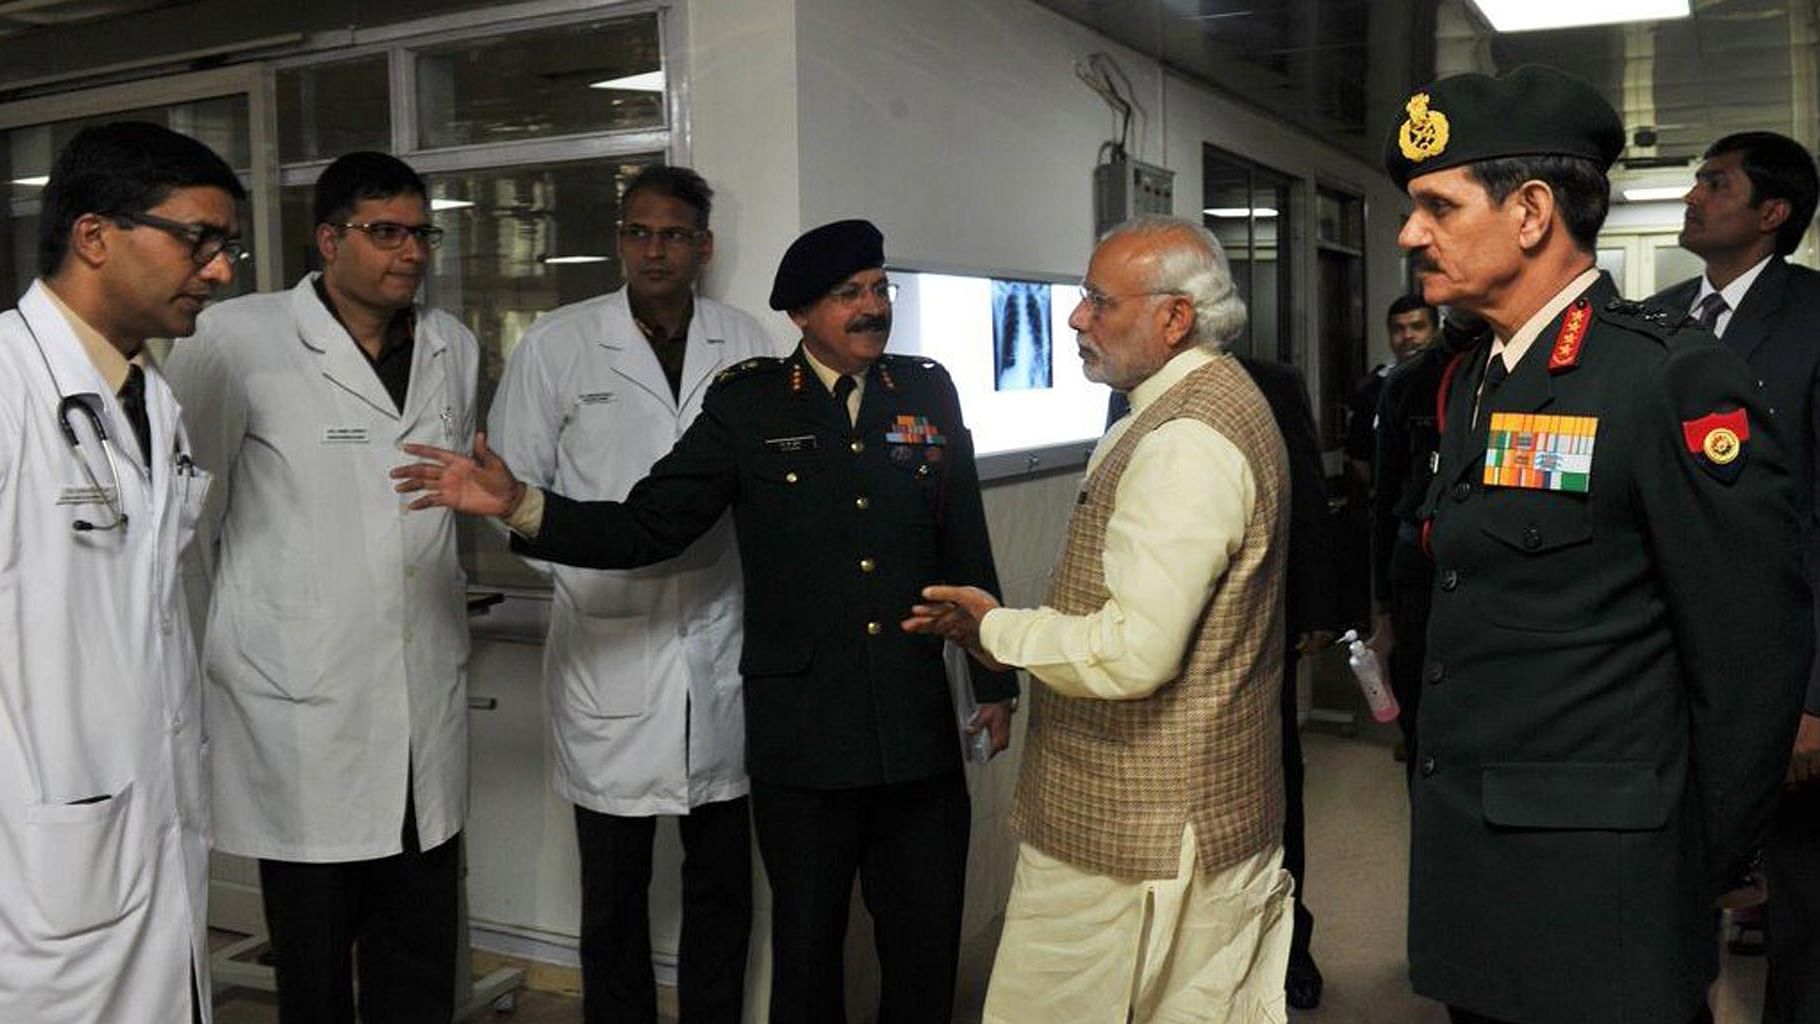 Prime Minister Narendra Modi and Army Chief Dalbir Suhag at Army’s R &amp; R Hospital. (Photo: Twitter/<a href="https://twitter.com/PMOIndia">@PMOIndia</a>)